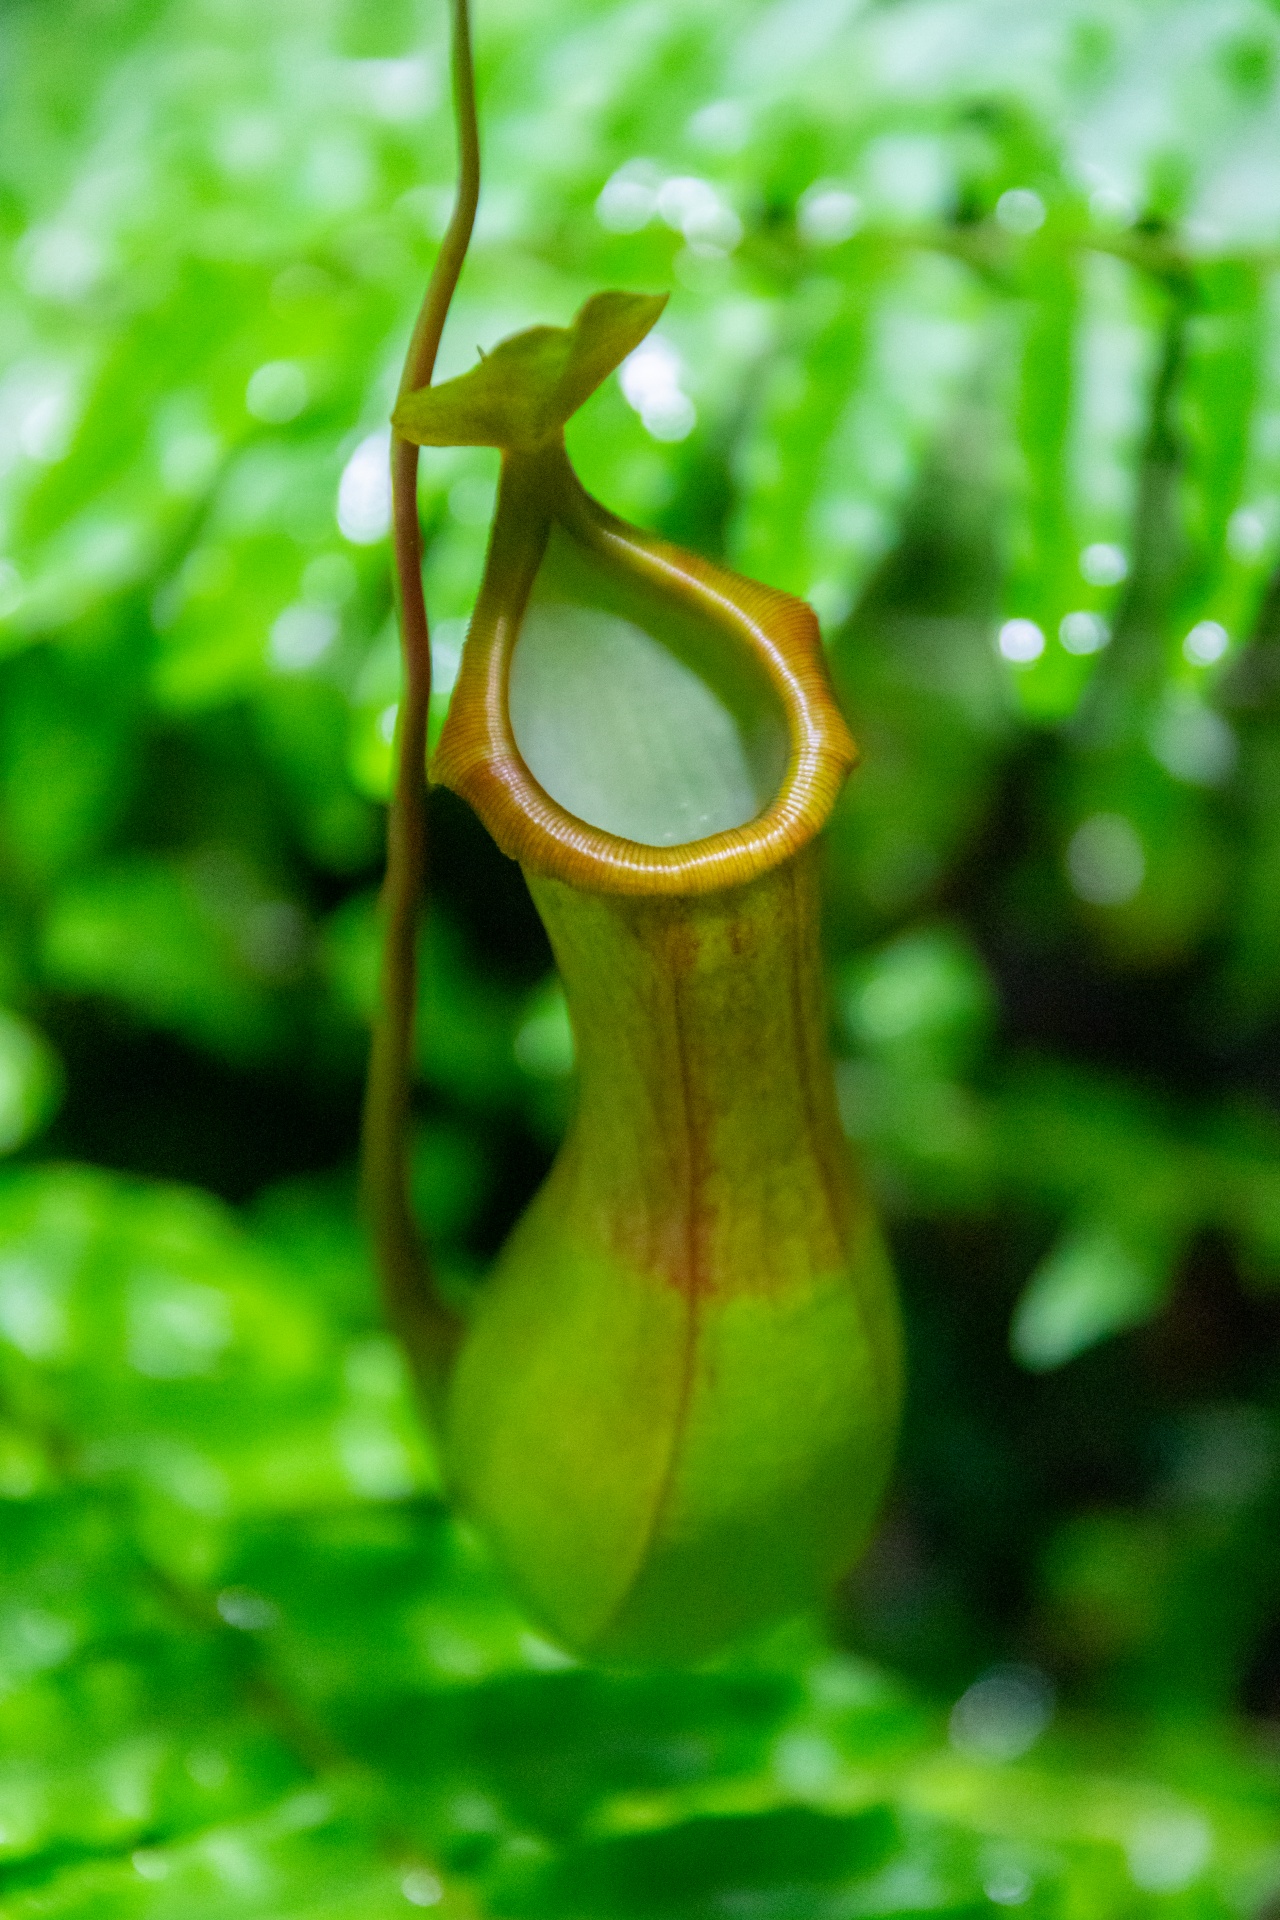 Insect eating pitcher plant